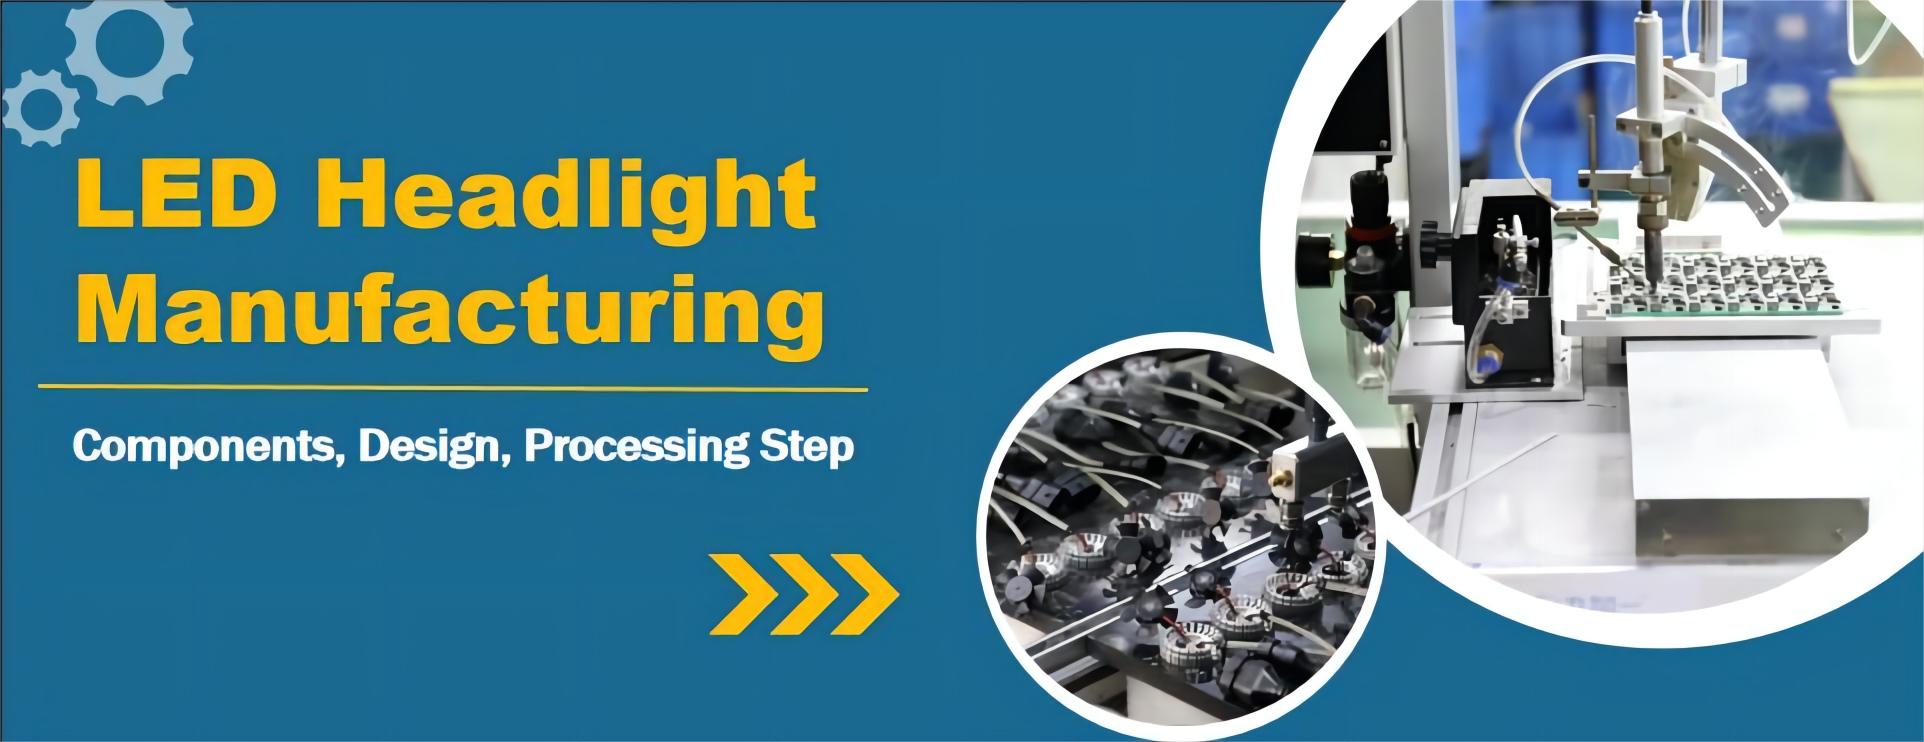 LED Headlight Bulb Manufacturing: Components, Design, and Processing Steps